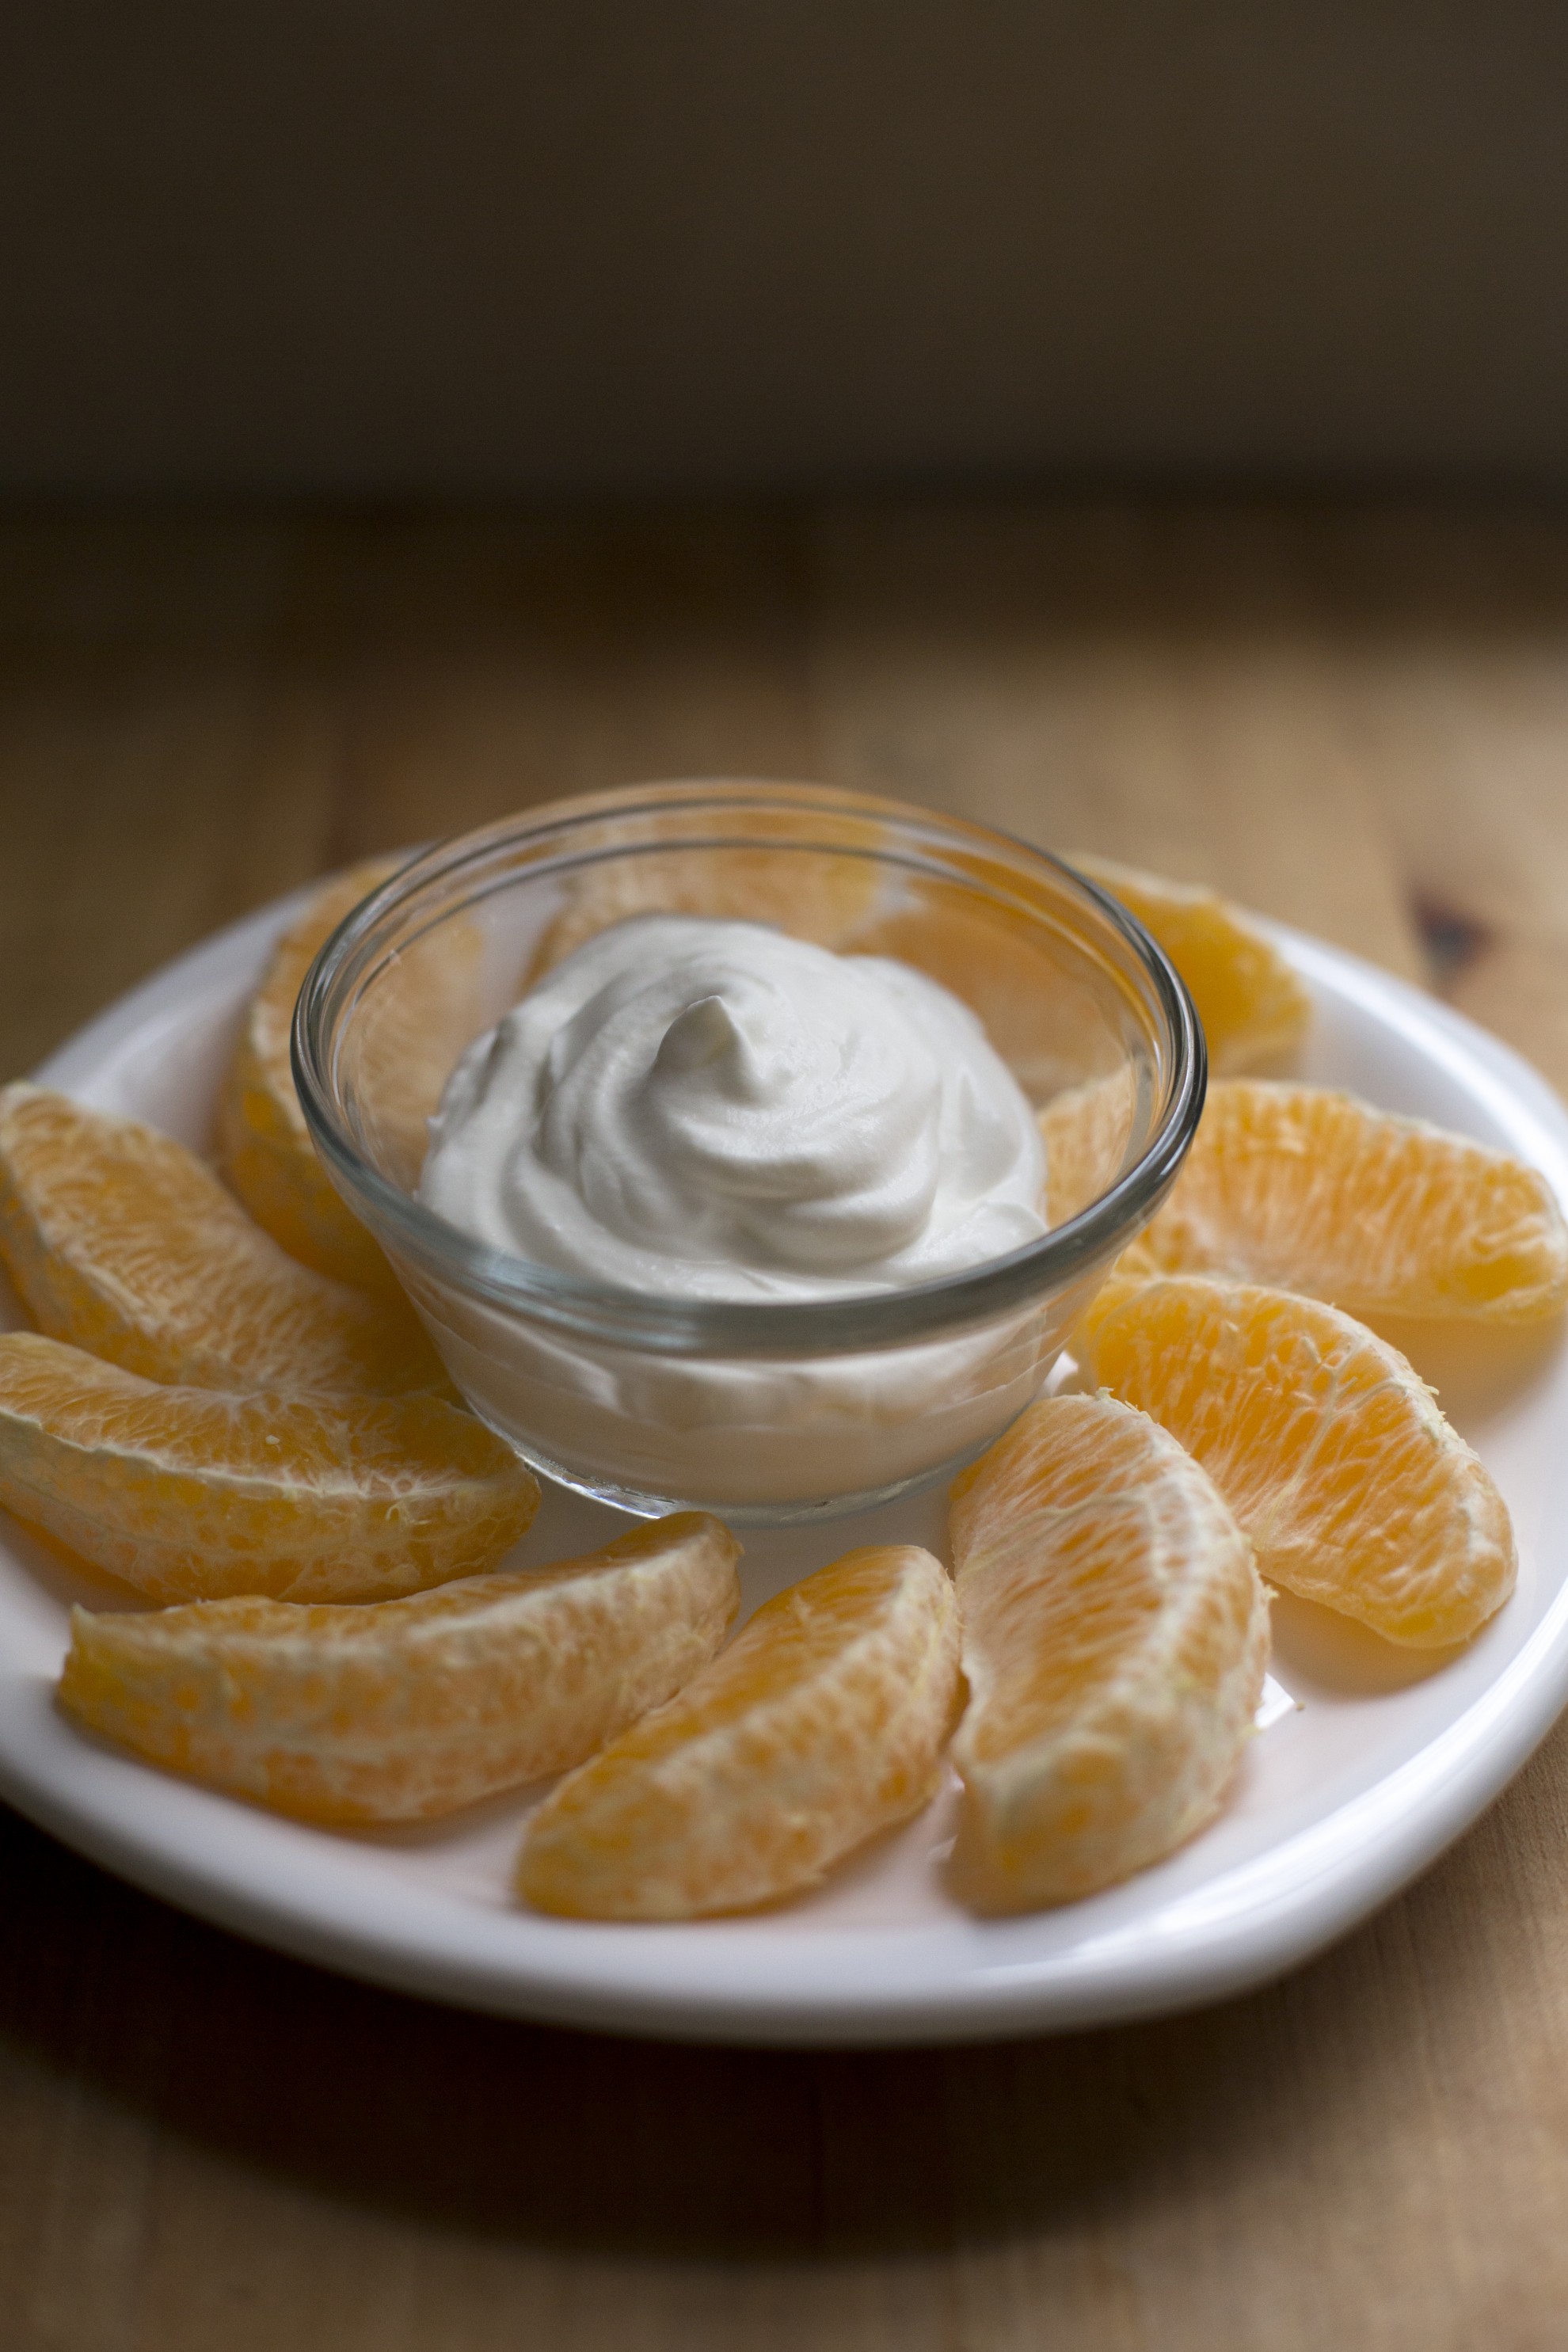 Healthy and Somewhat Naughty Version of an Orange Creamsicle